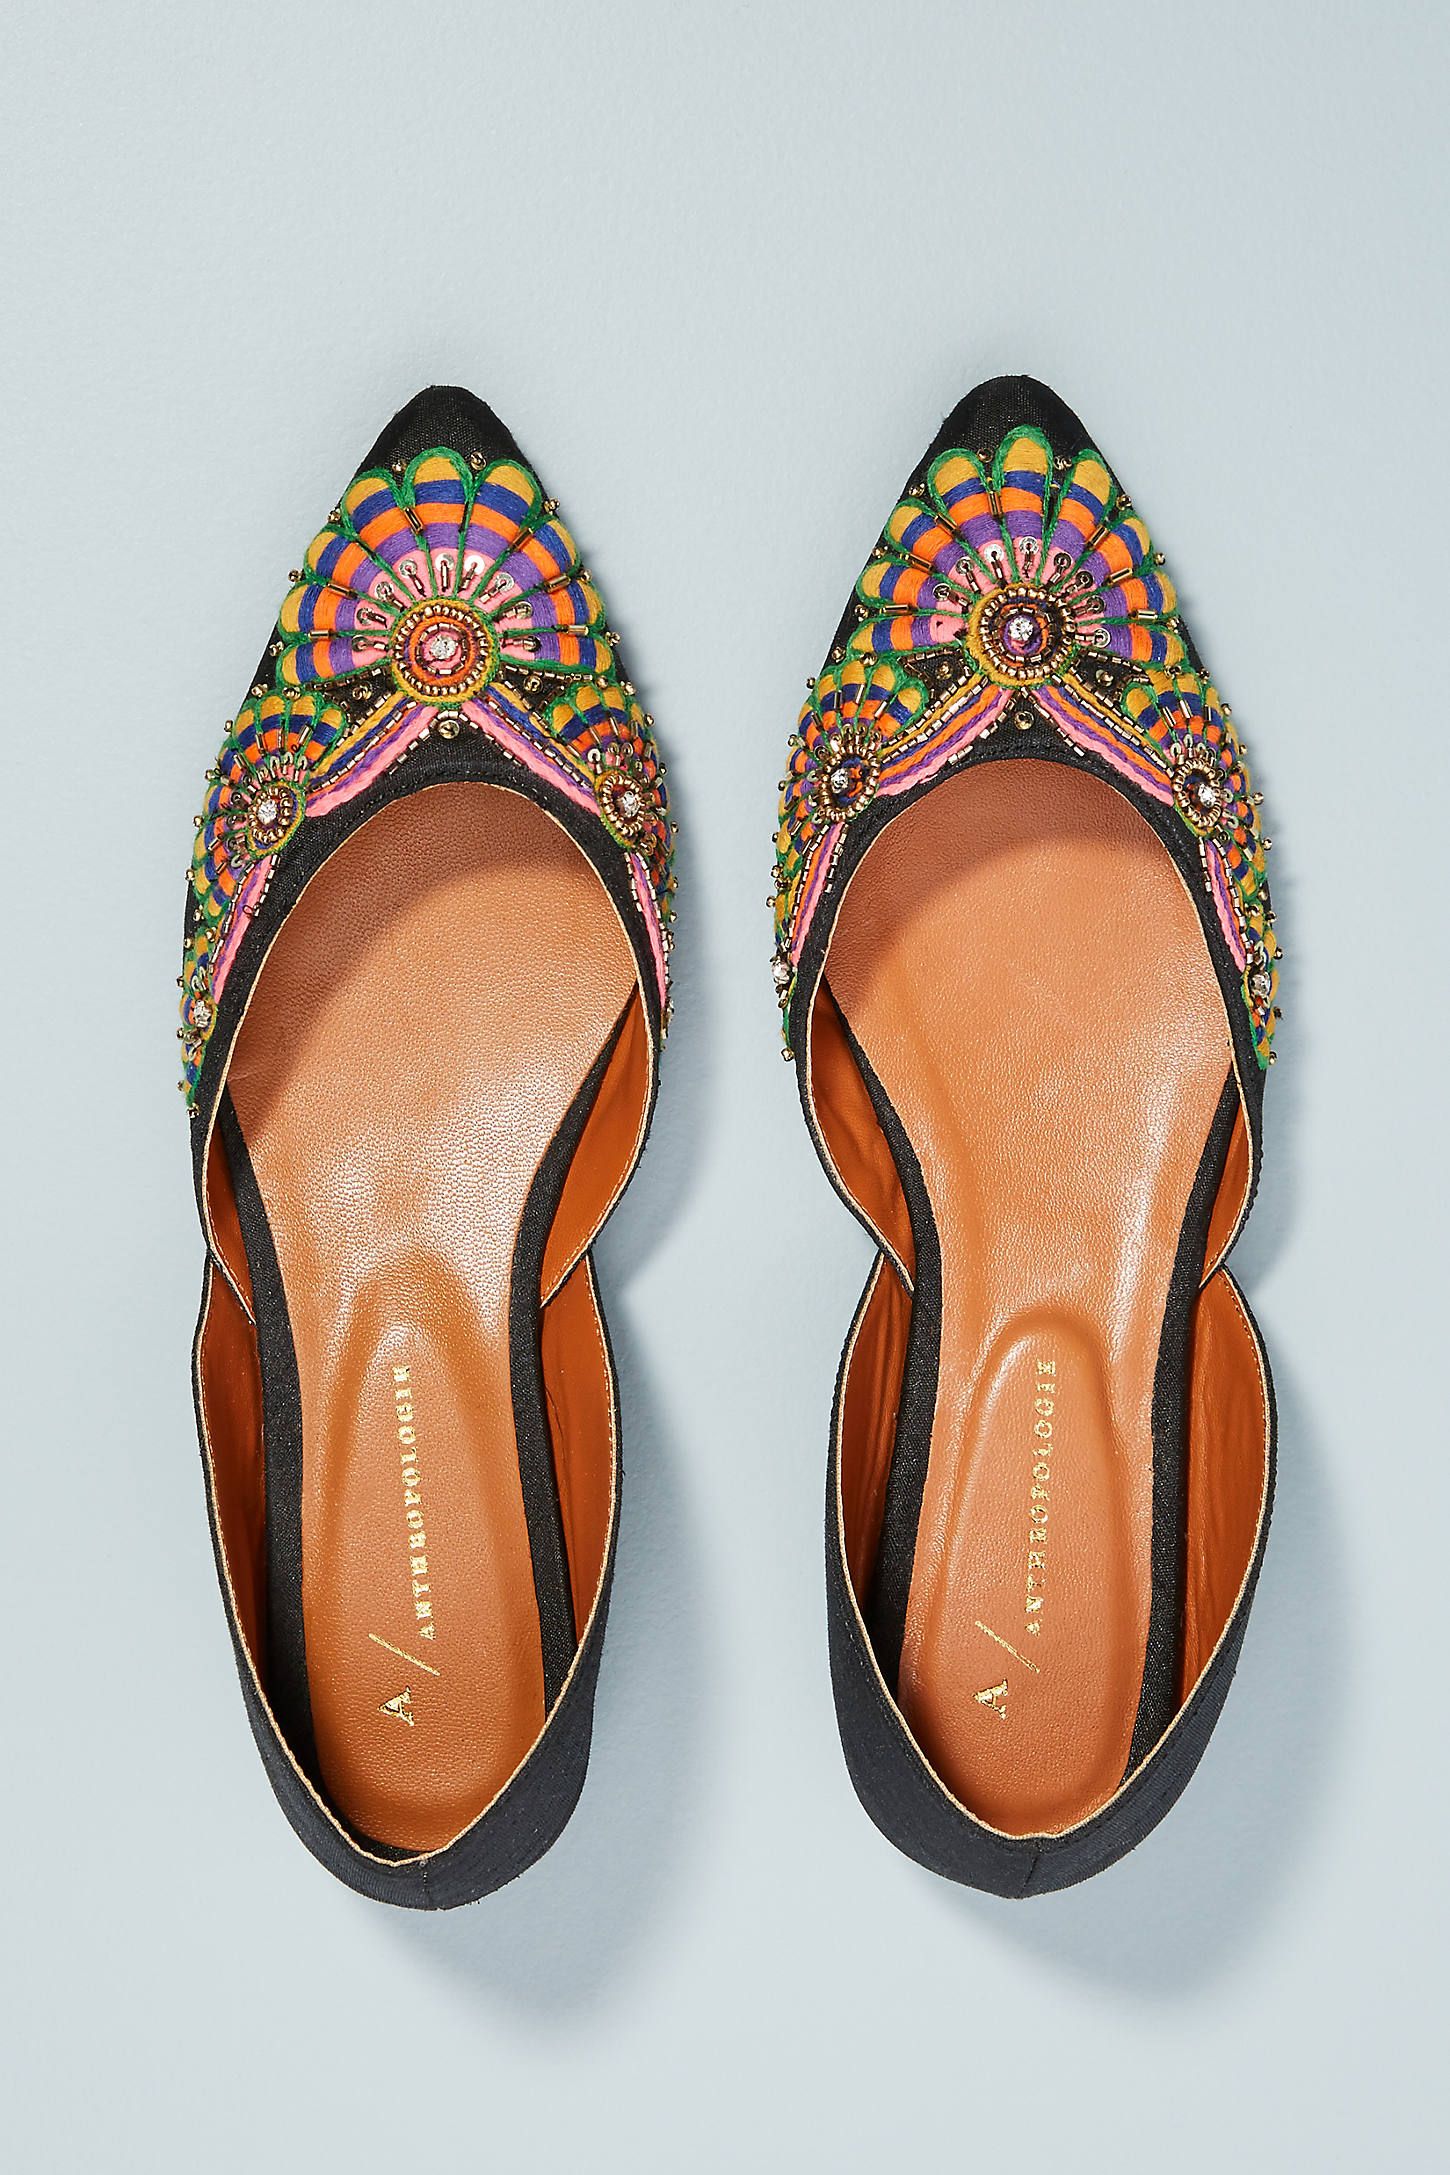 Anthropologie Well-Embroidered D'Orsay Flats | Anthropologie (US)